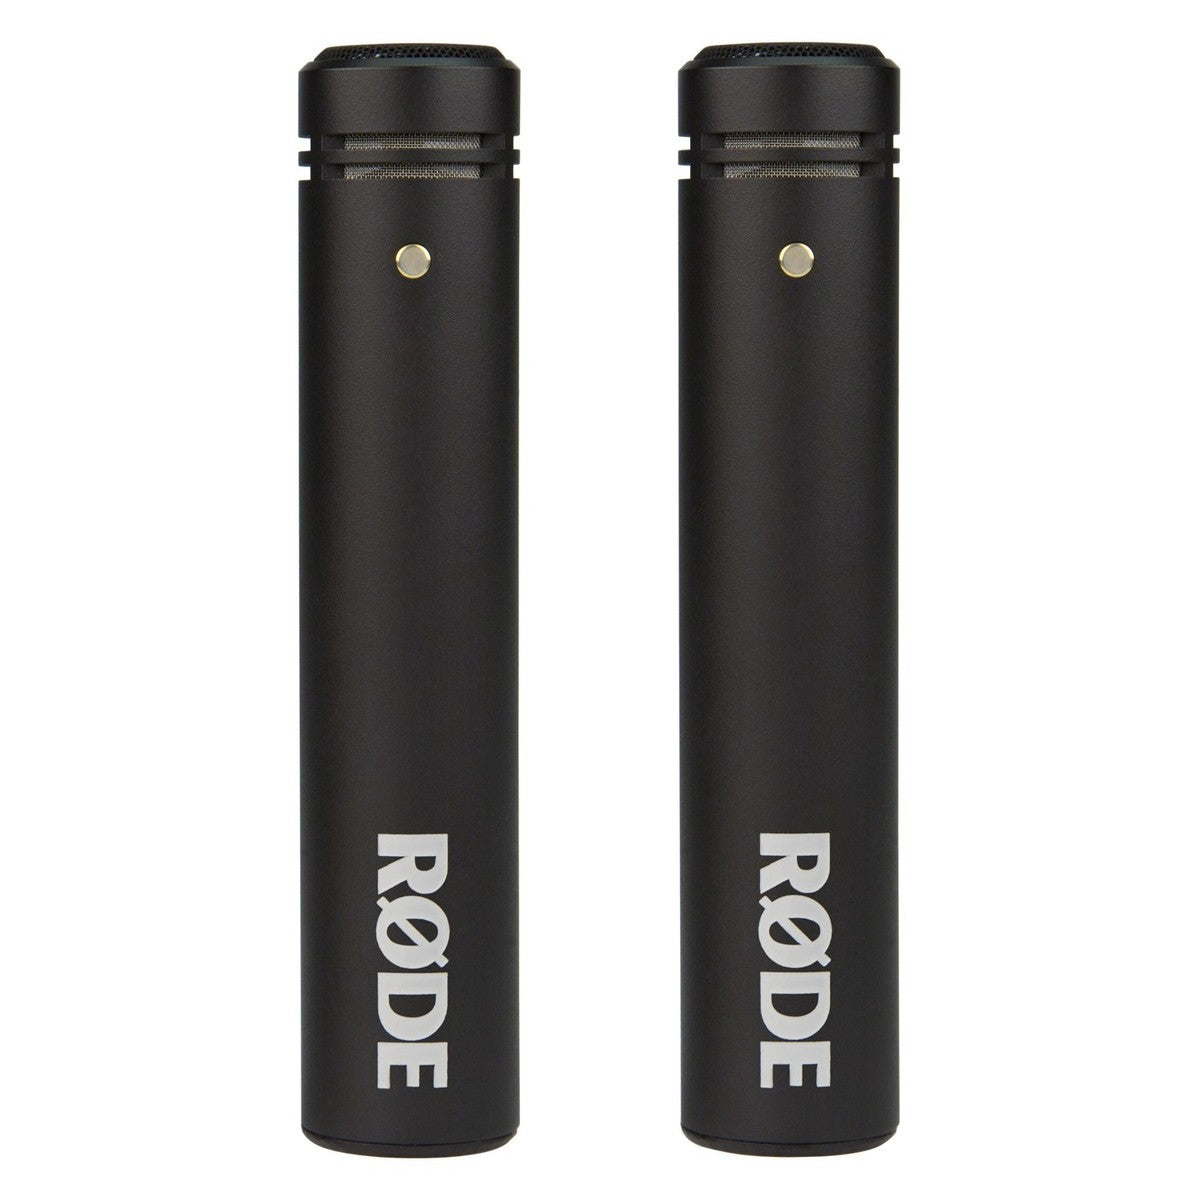 RØDE M5 Small-diaphragm Condenser Microphone - Matched Pair